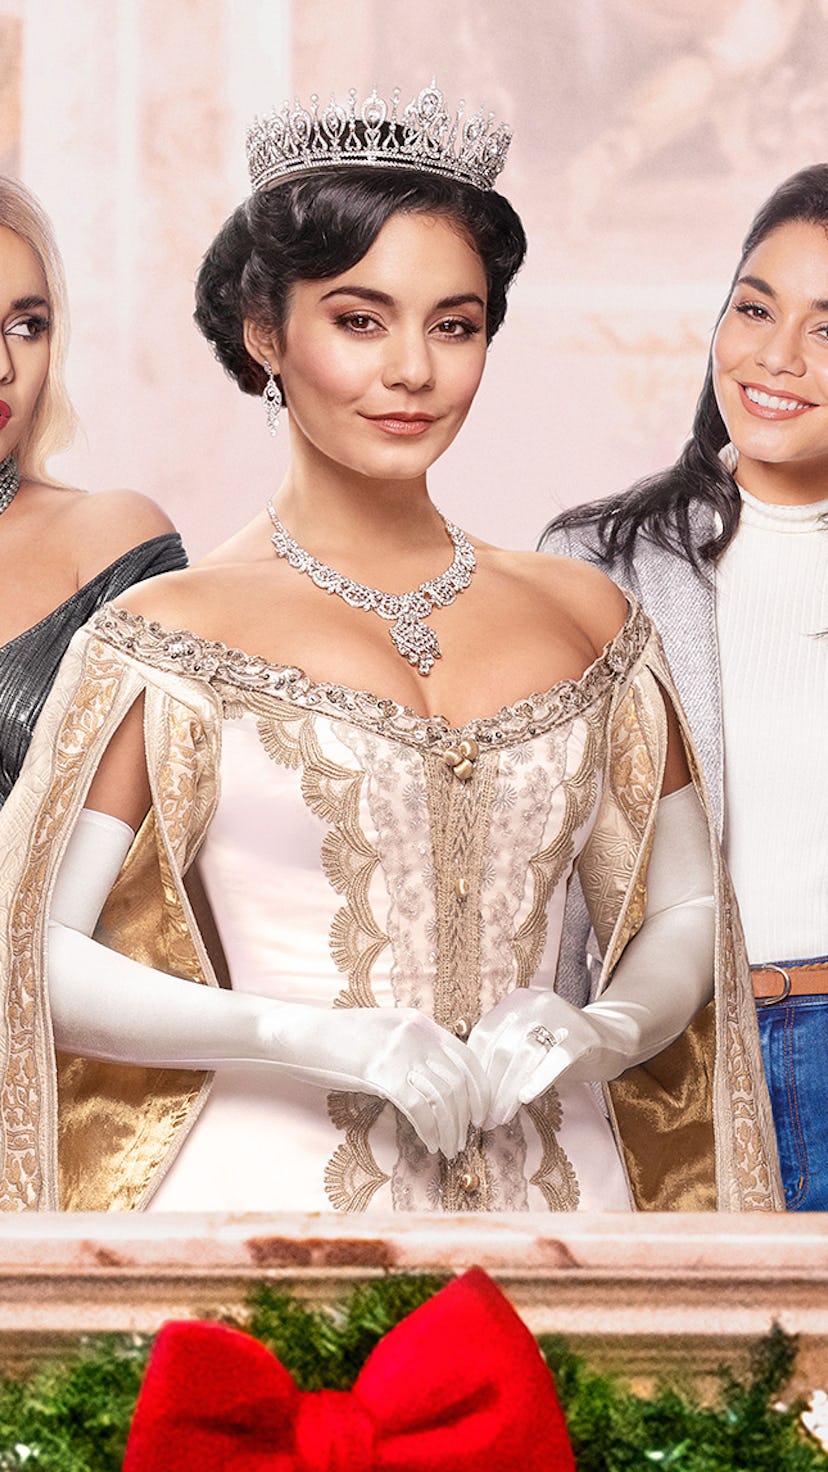 Vanessa Hudgens in 'The Princess Switch: Switched Again' via the Netflix press site.